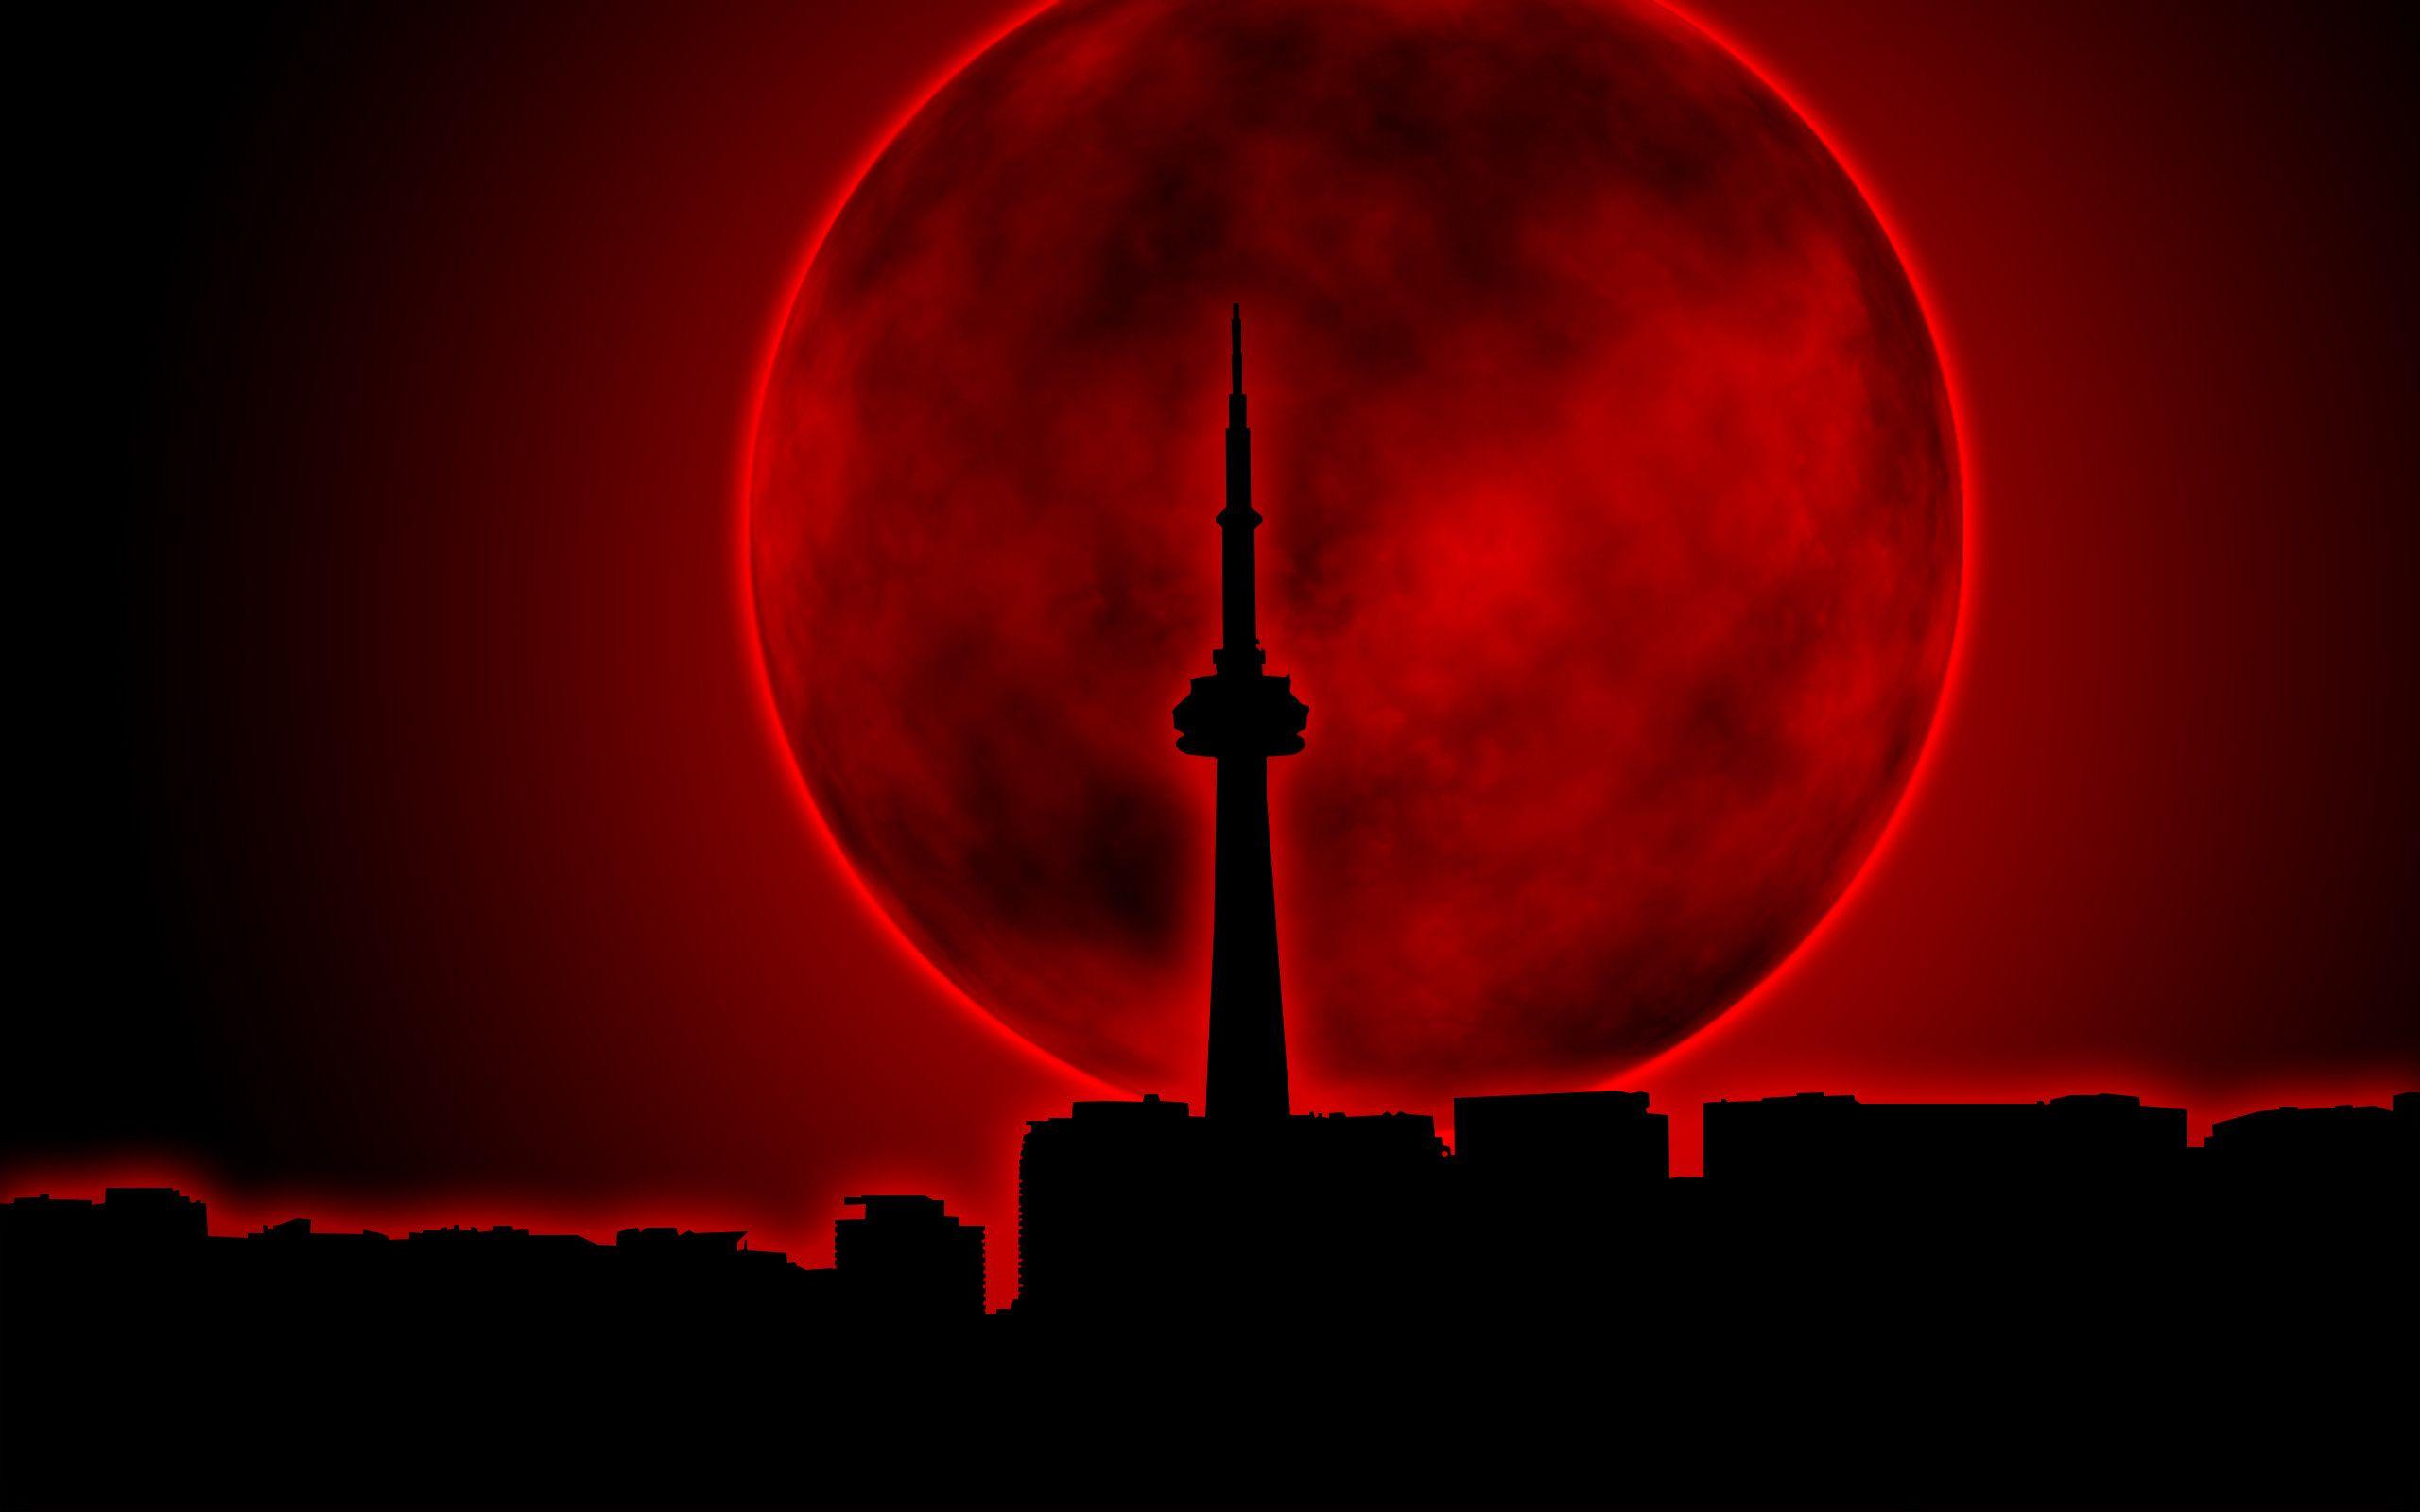 Wallpaper City Moon. Red and Black Wallpaper